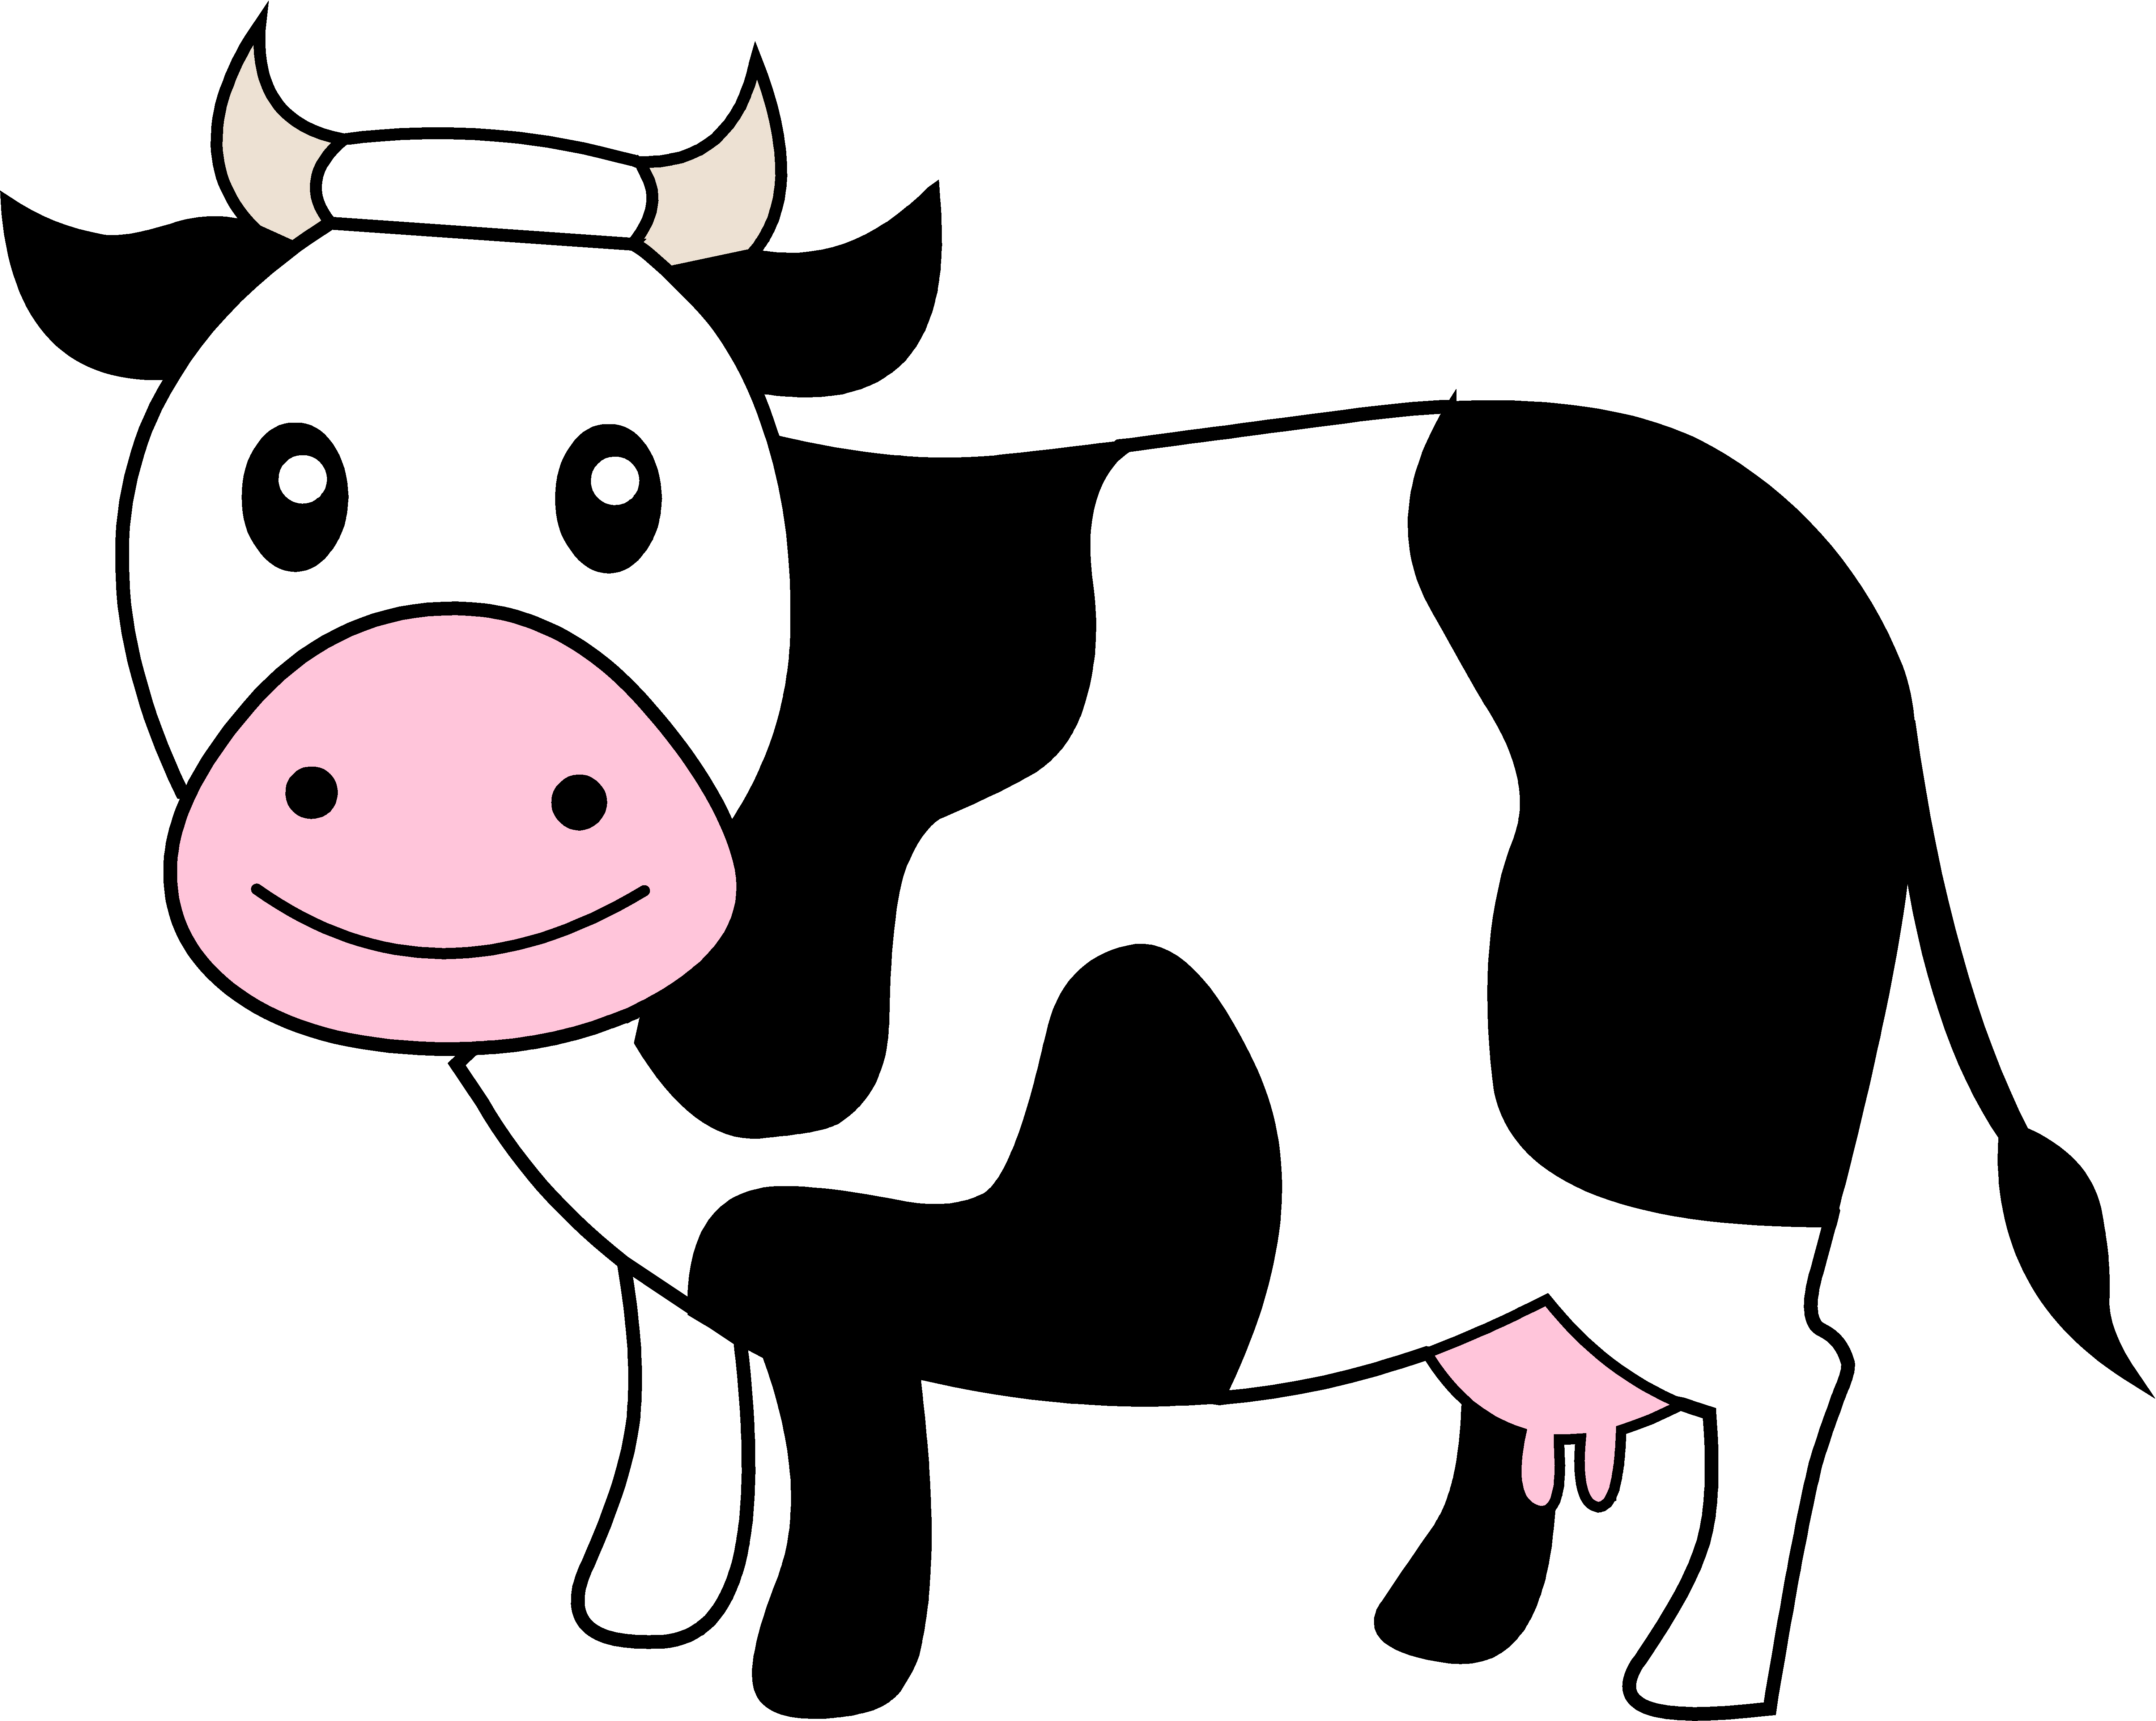 cow head clipart black and white